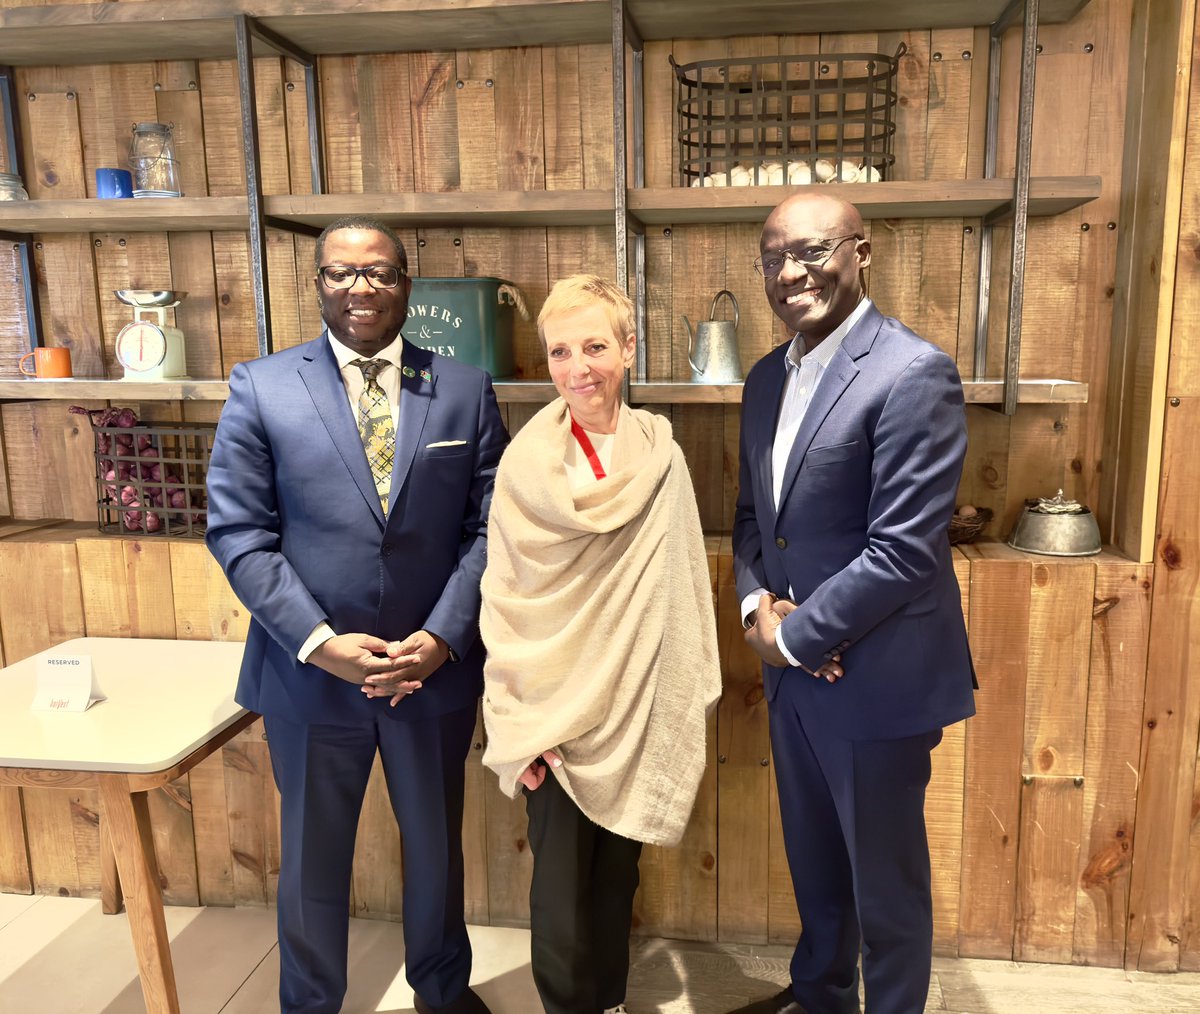 Honored to meet with H.E. Ms. Anna Karin Eneström & H.E. Mr. Chola Milambo, co-chairs leading the Global Digital Compact process, annexed to the Pact for the Future at the margins of the #CivilSocietyDialogue. We discussed key elements like #AI, global data governance, &